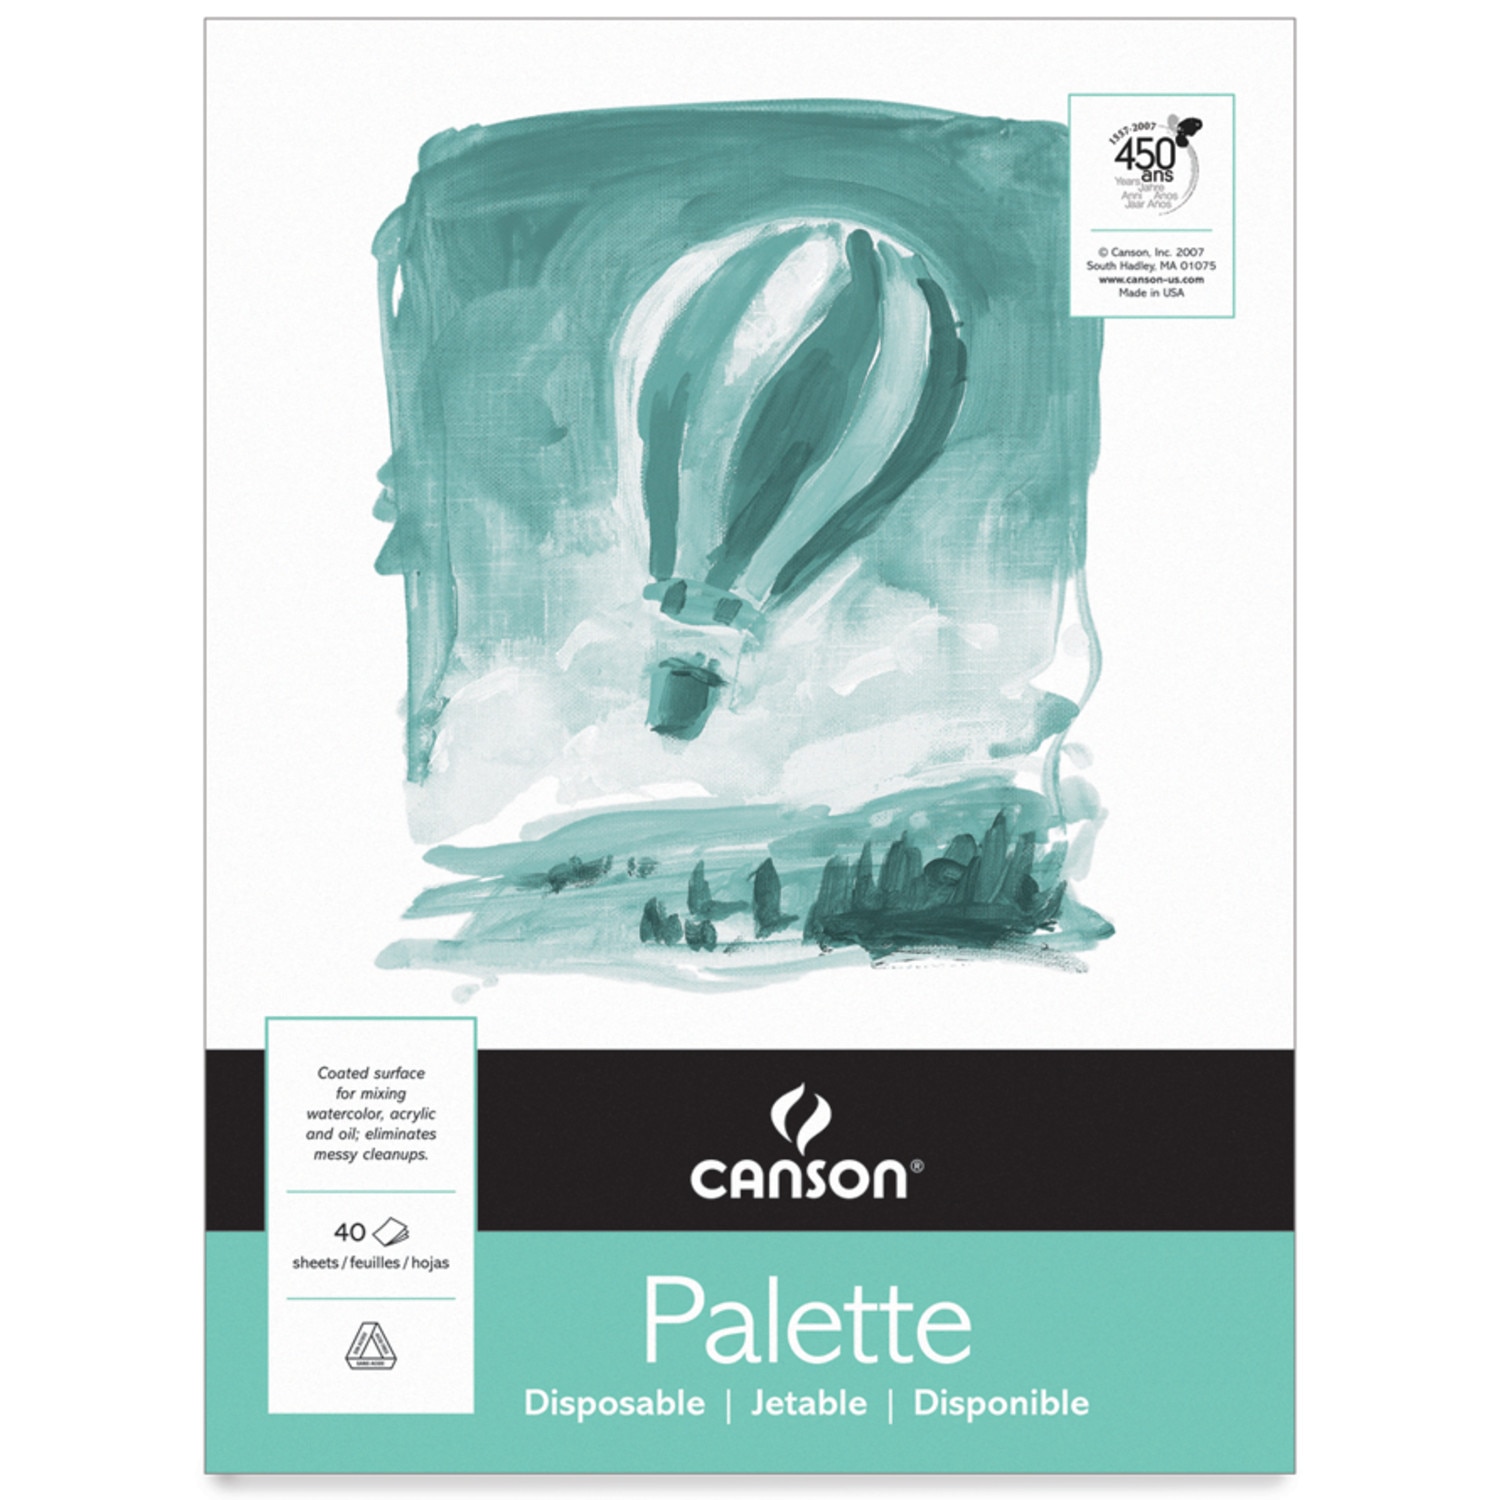 Canson Foundation Series Disposable Palette Pad, 9" x 12"